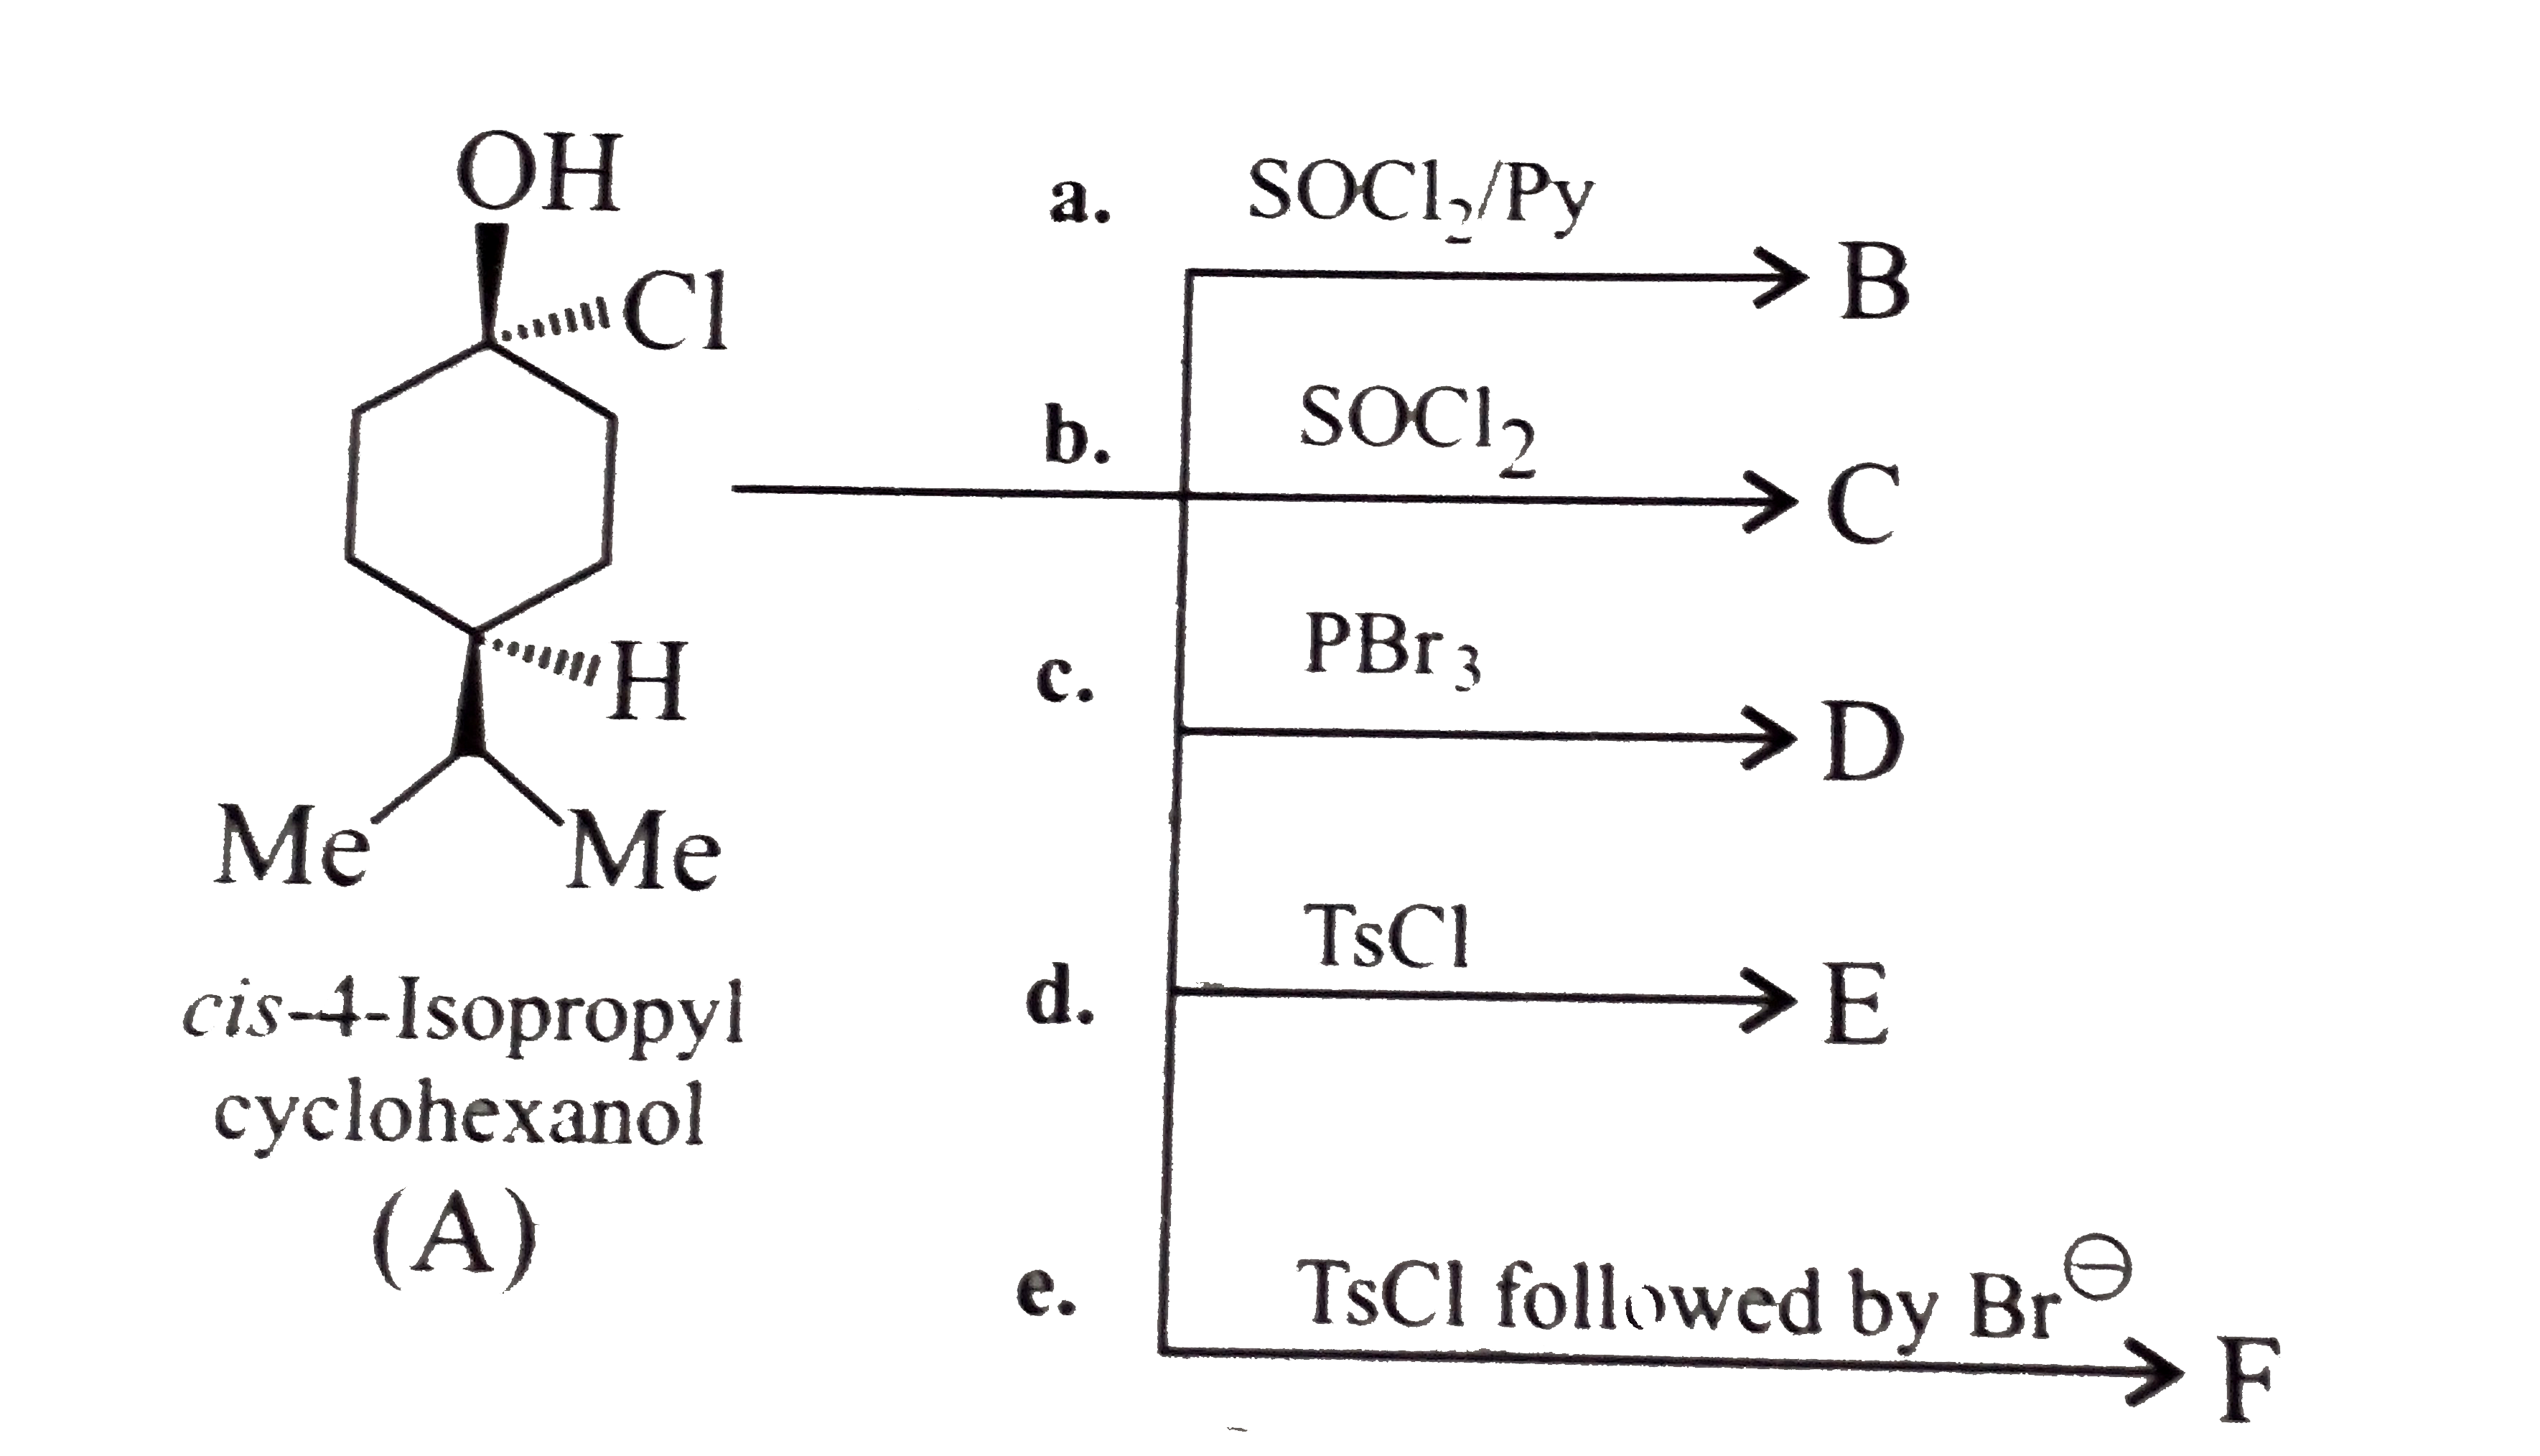 Given the stereochemical products B, C, and D of the following reactions: